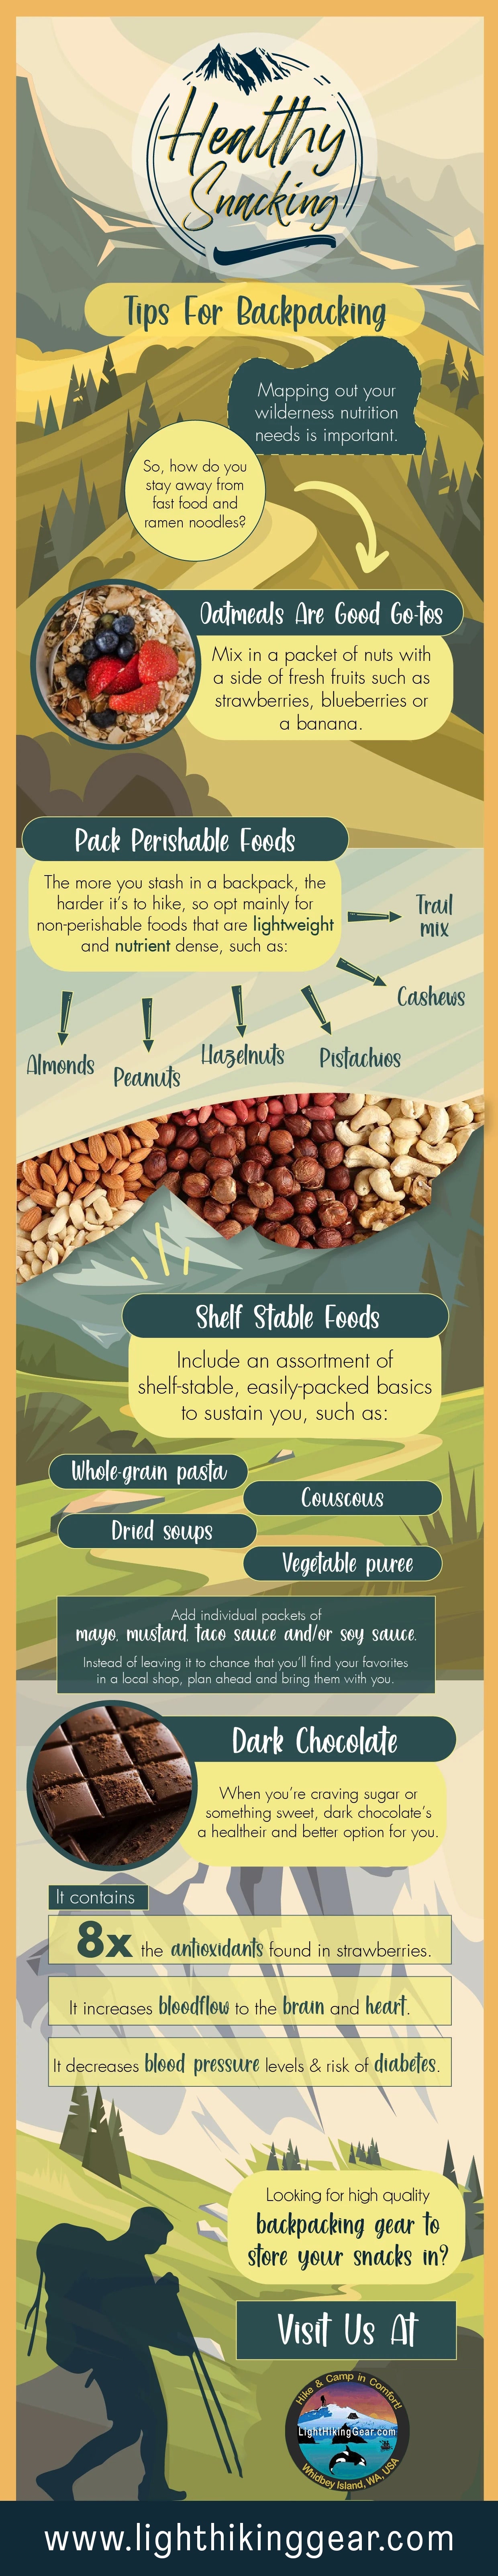 Healthy Snacking Tips For Backpacking | Infographic